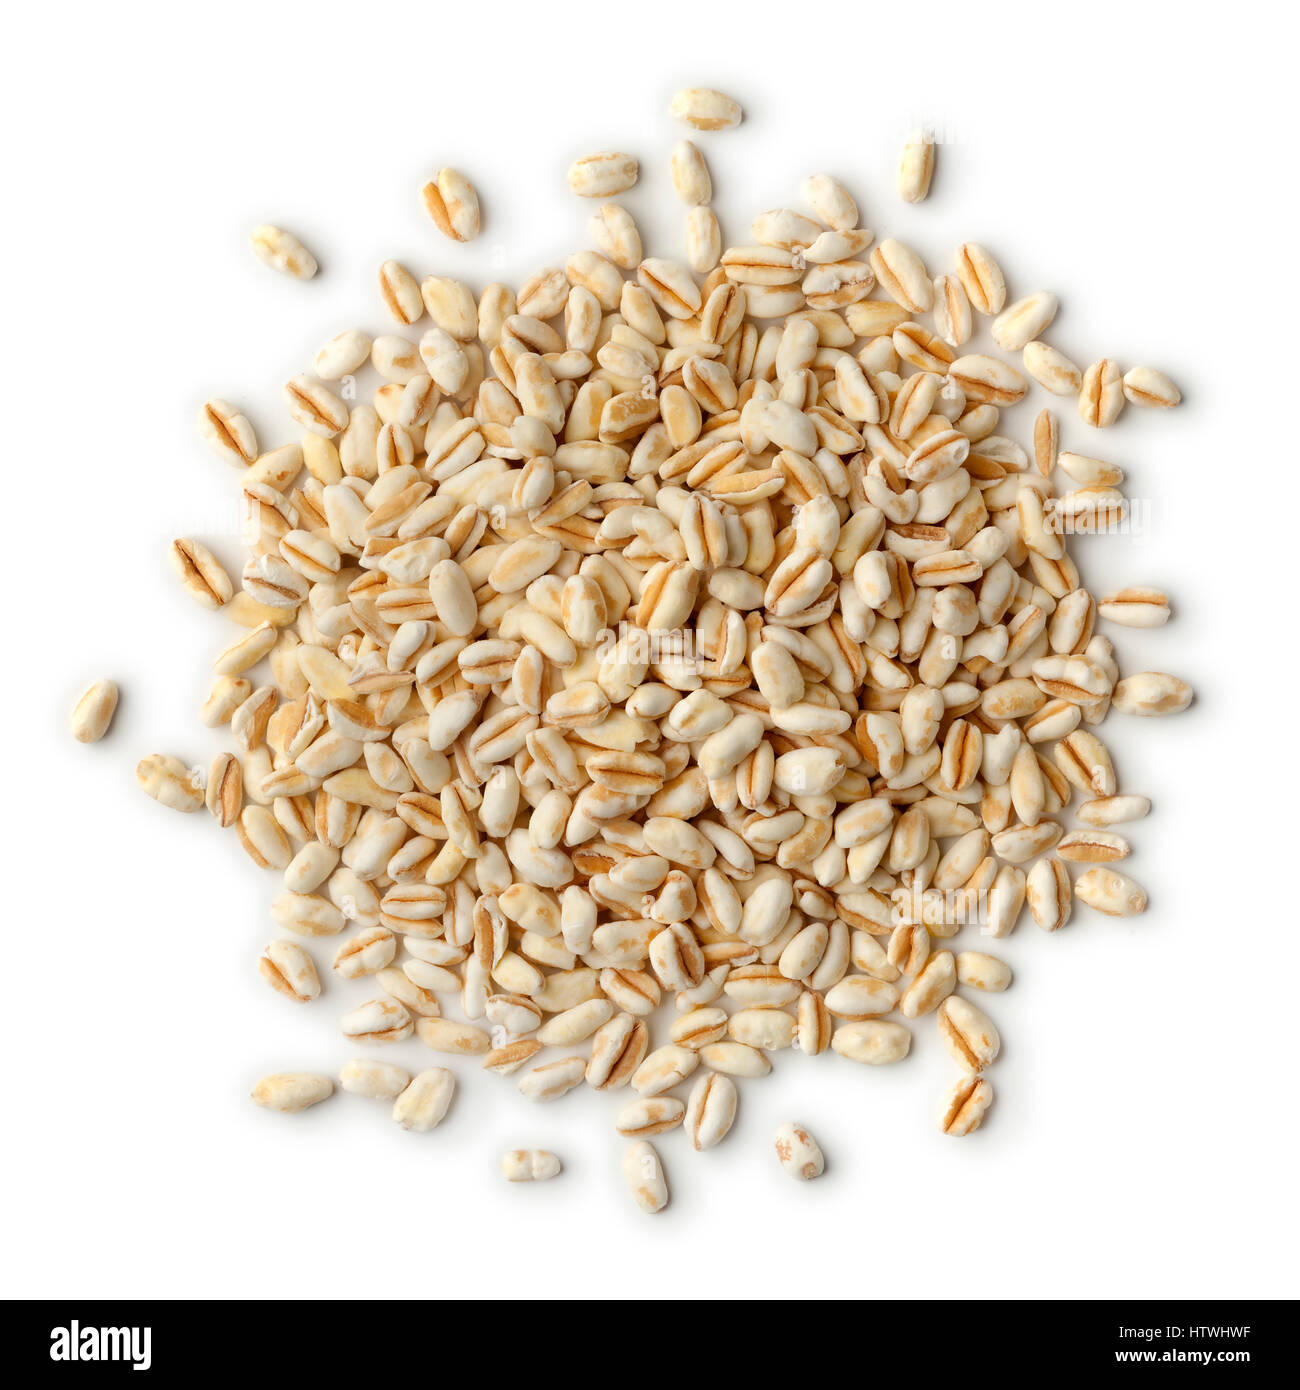 Heap of ebly seeds on the background Stock Photo